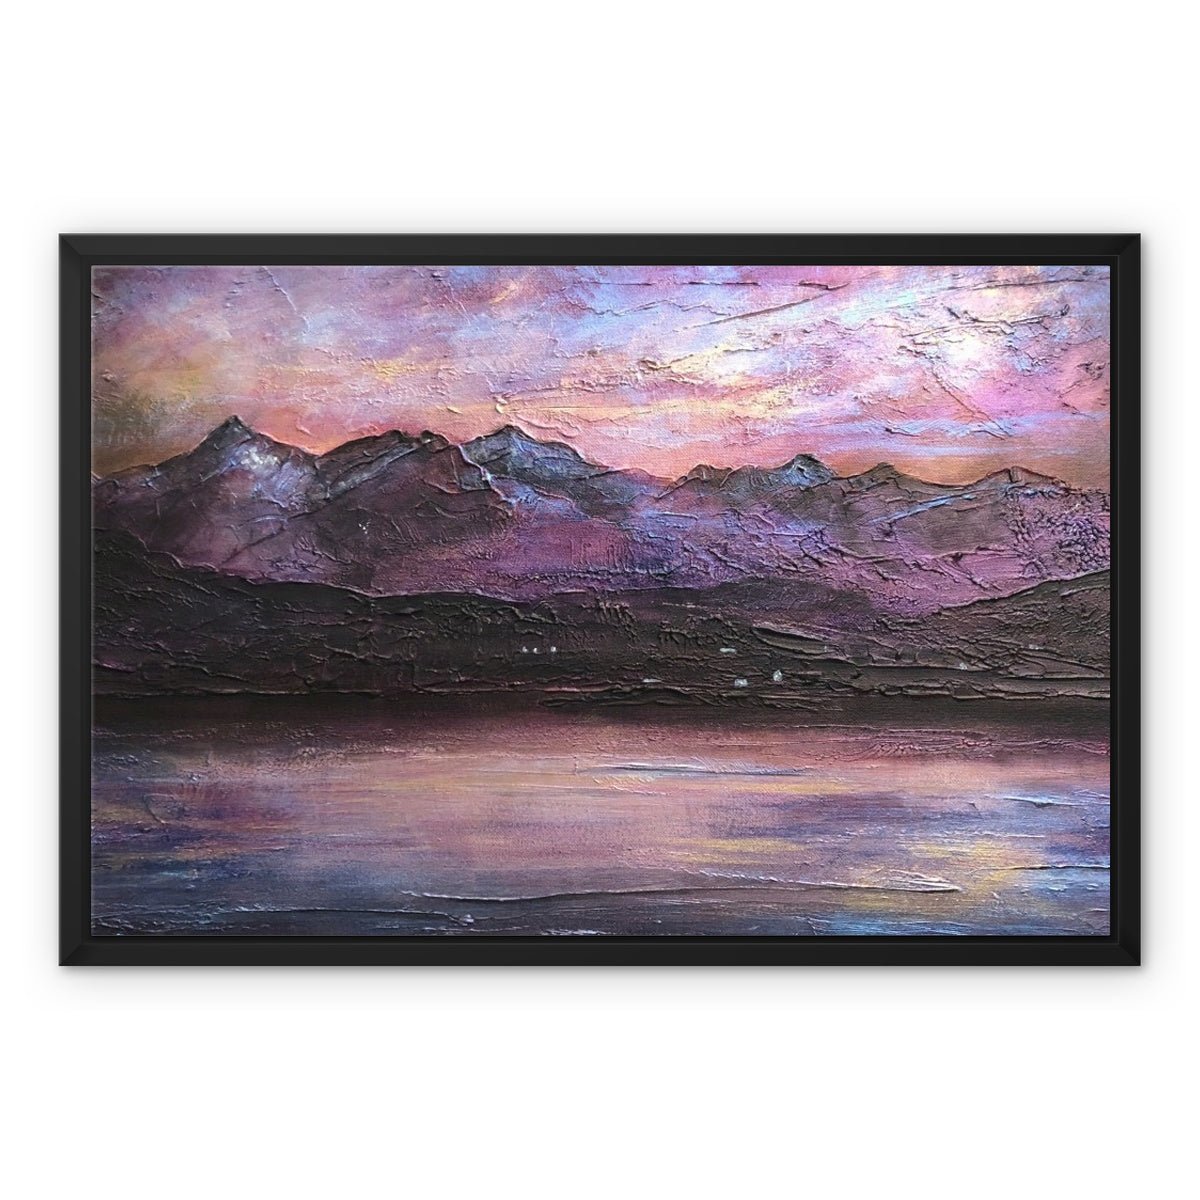 Last Skye Light Painting | Framed Canvas From Scotland-Floating Framed Canvas Prints-Skye Art Gallery-24"x18"-Black Frame-Paintings, Prints, Homeware, Art Gifts From Scotland By Scottish Artist Kevin Hunter